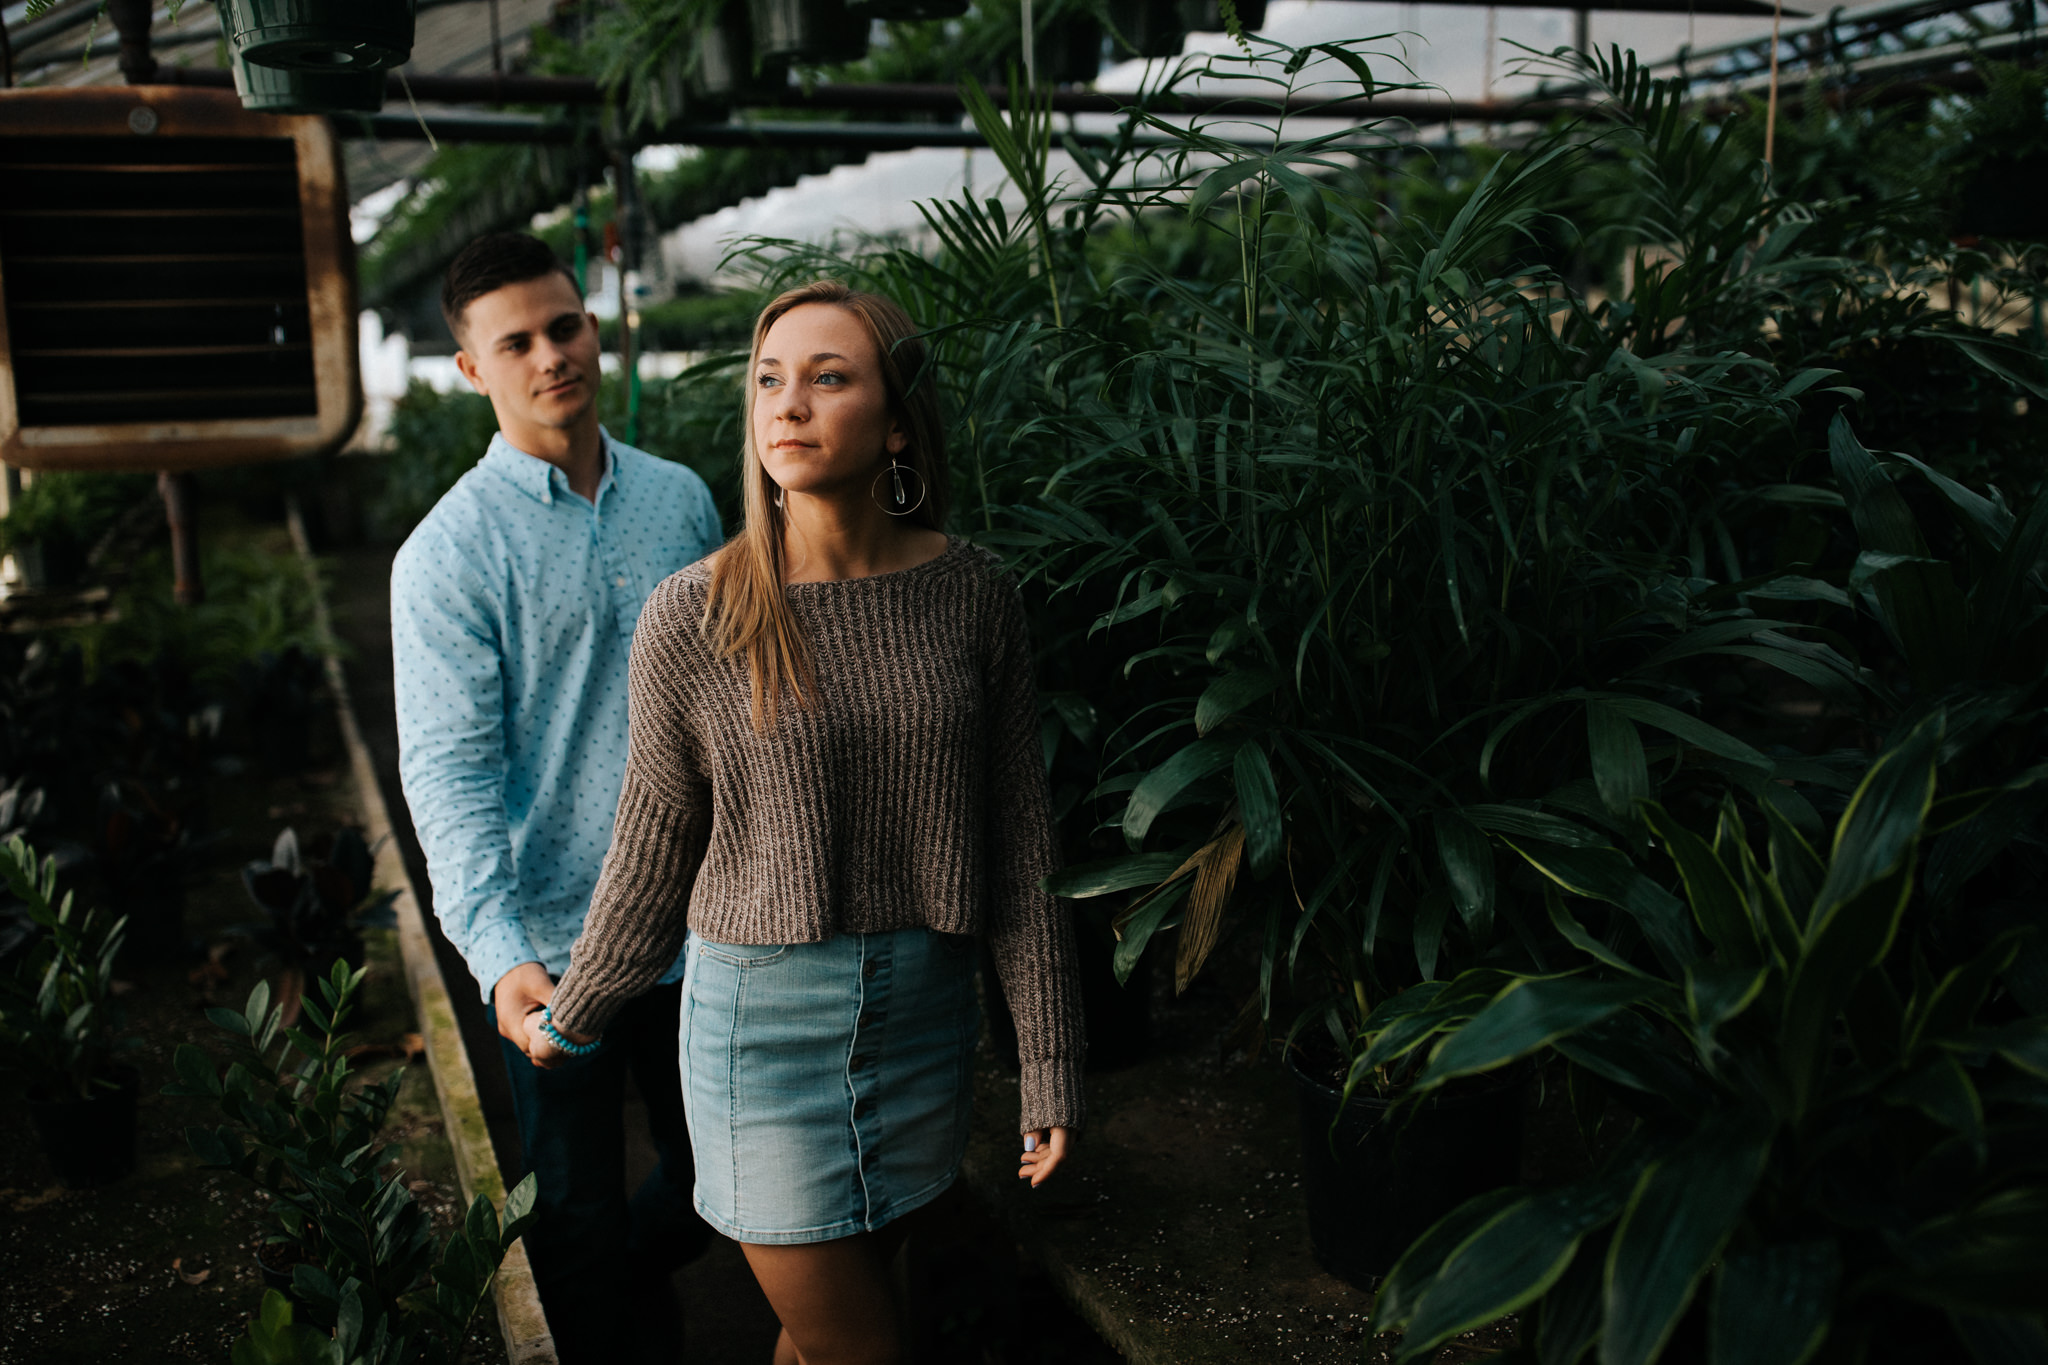 memphis-engagement-photographer-thewarmtharoundyou-greenhouse-engagement-pictures (6 of 118).jpg